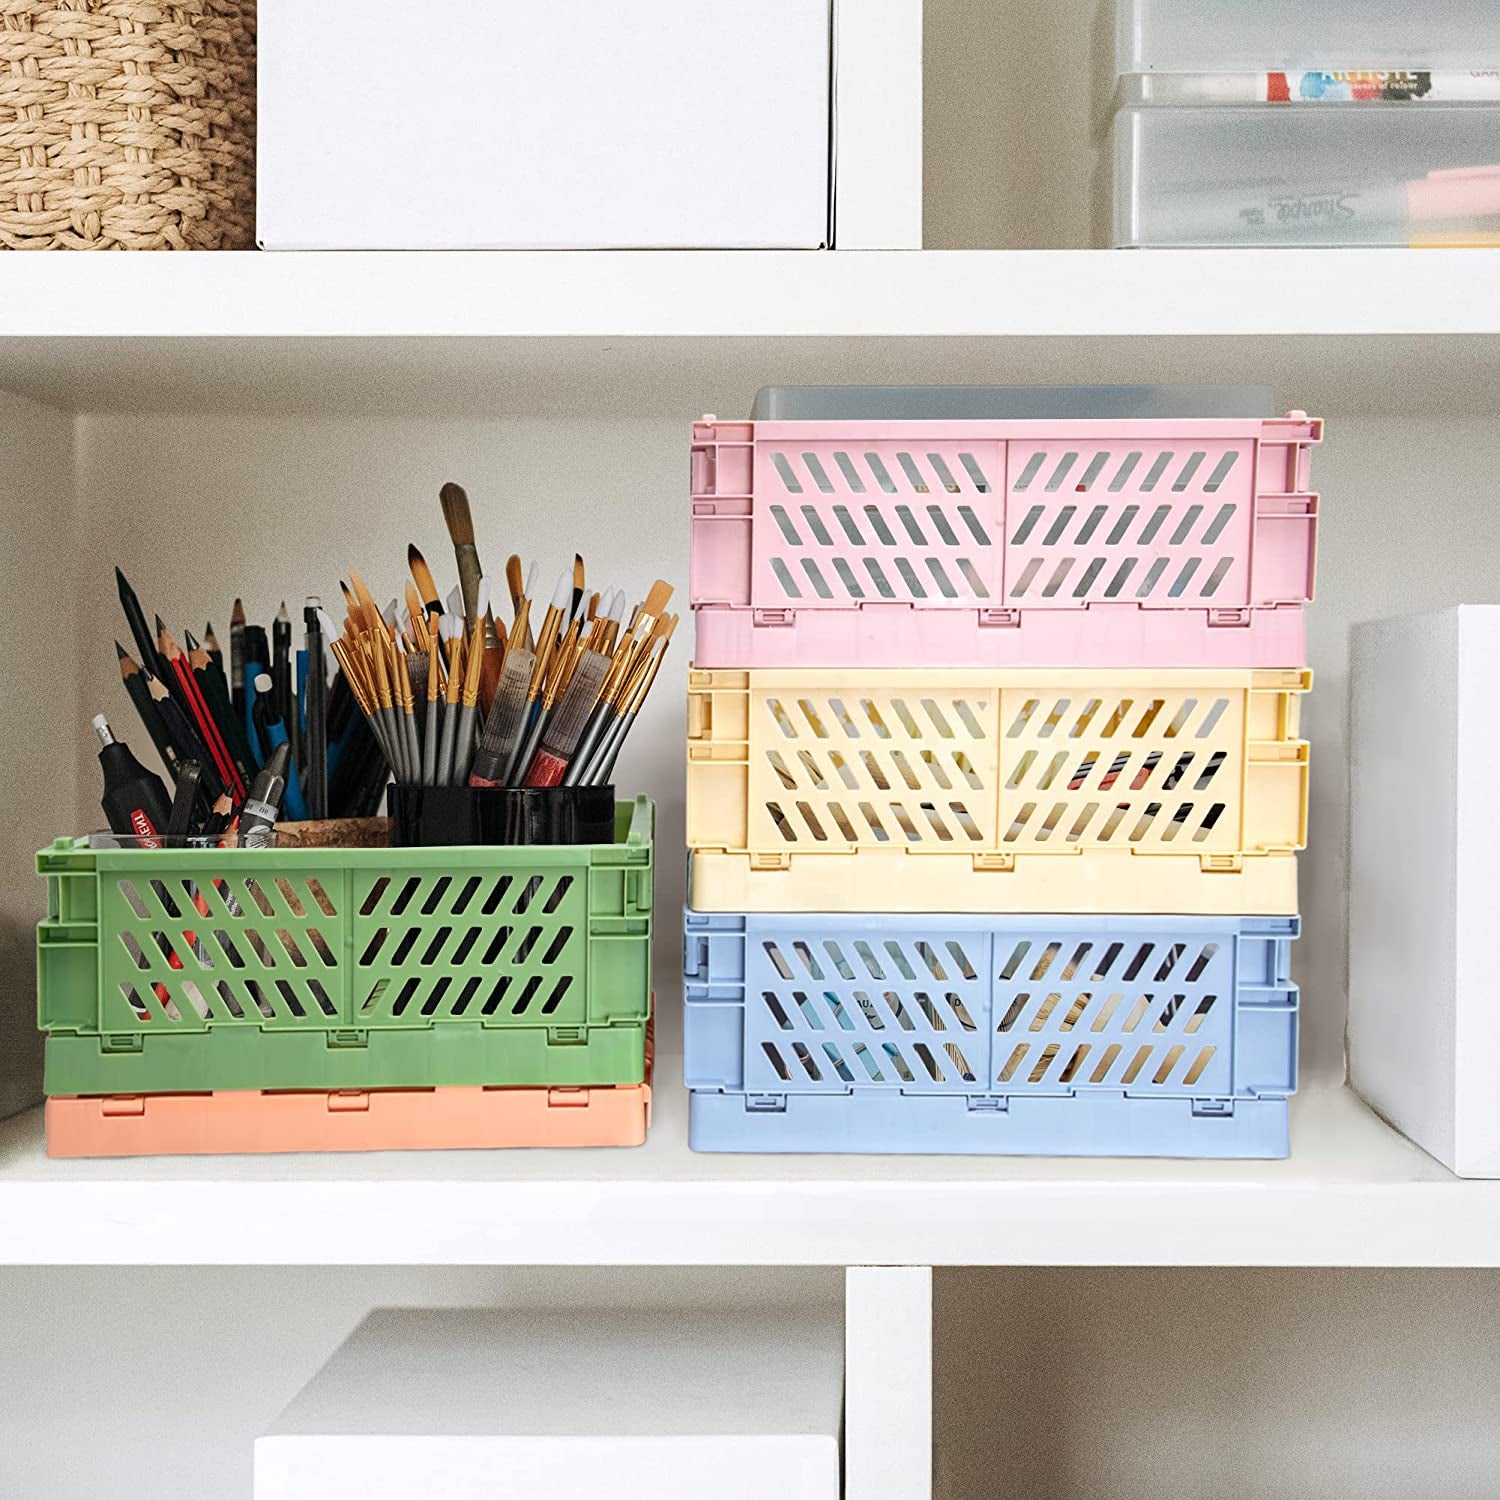 Colorful plastic collapsable baskets that hold art supplies, and is placed on a shelf